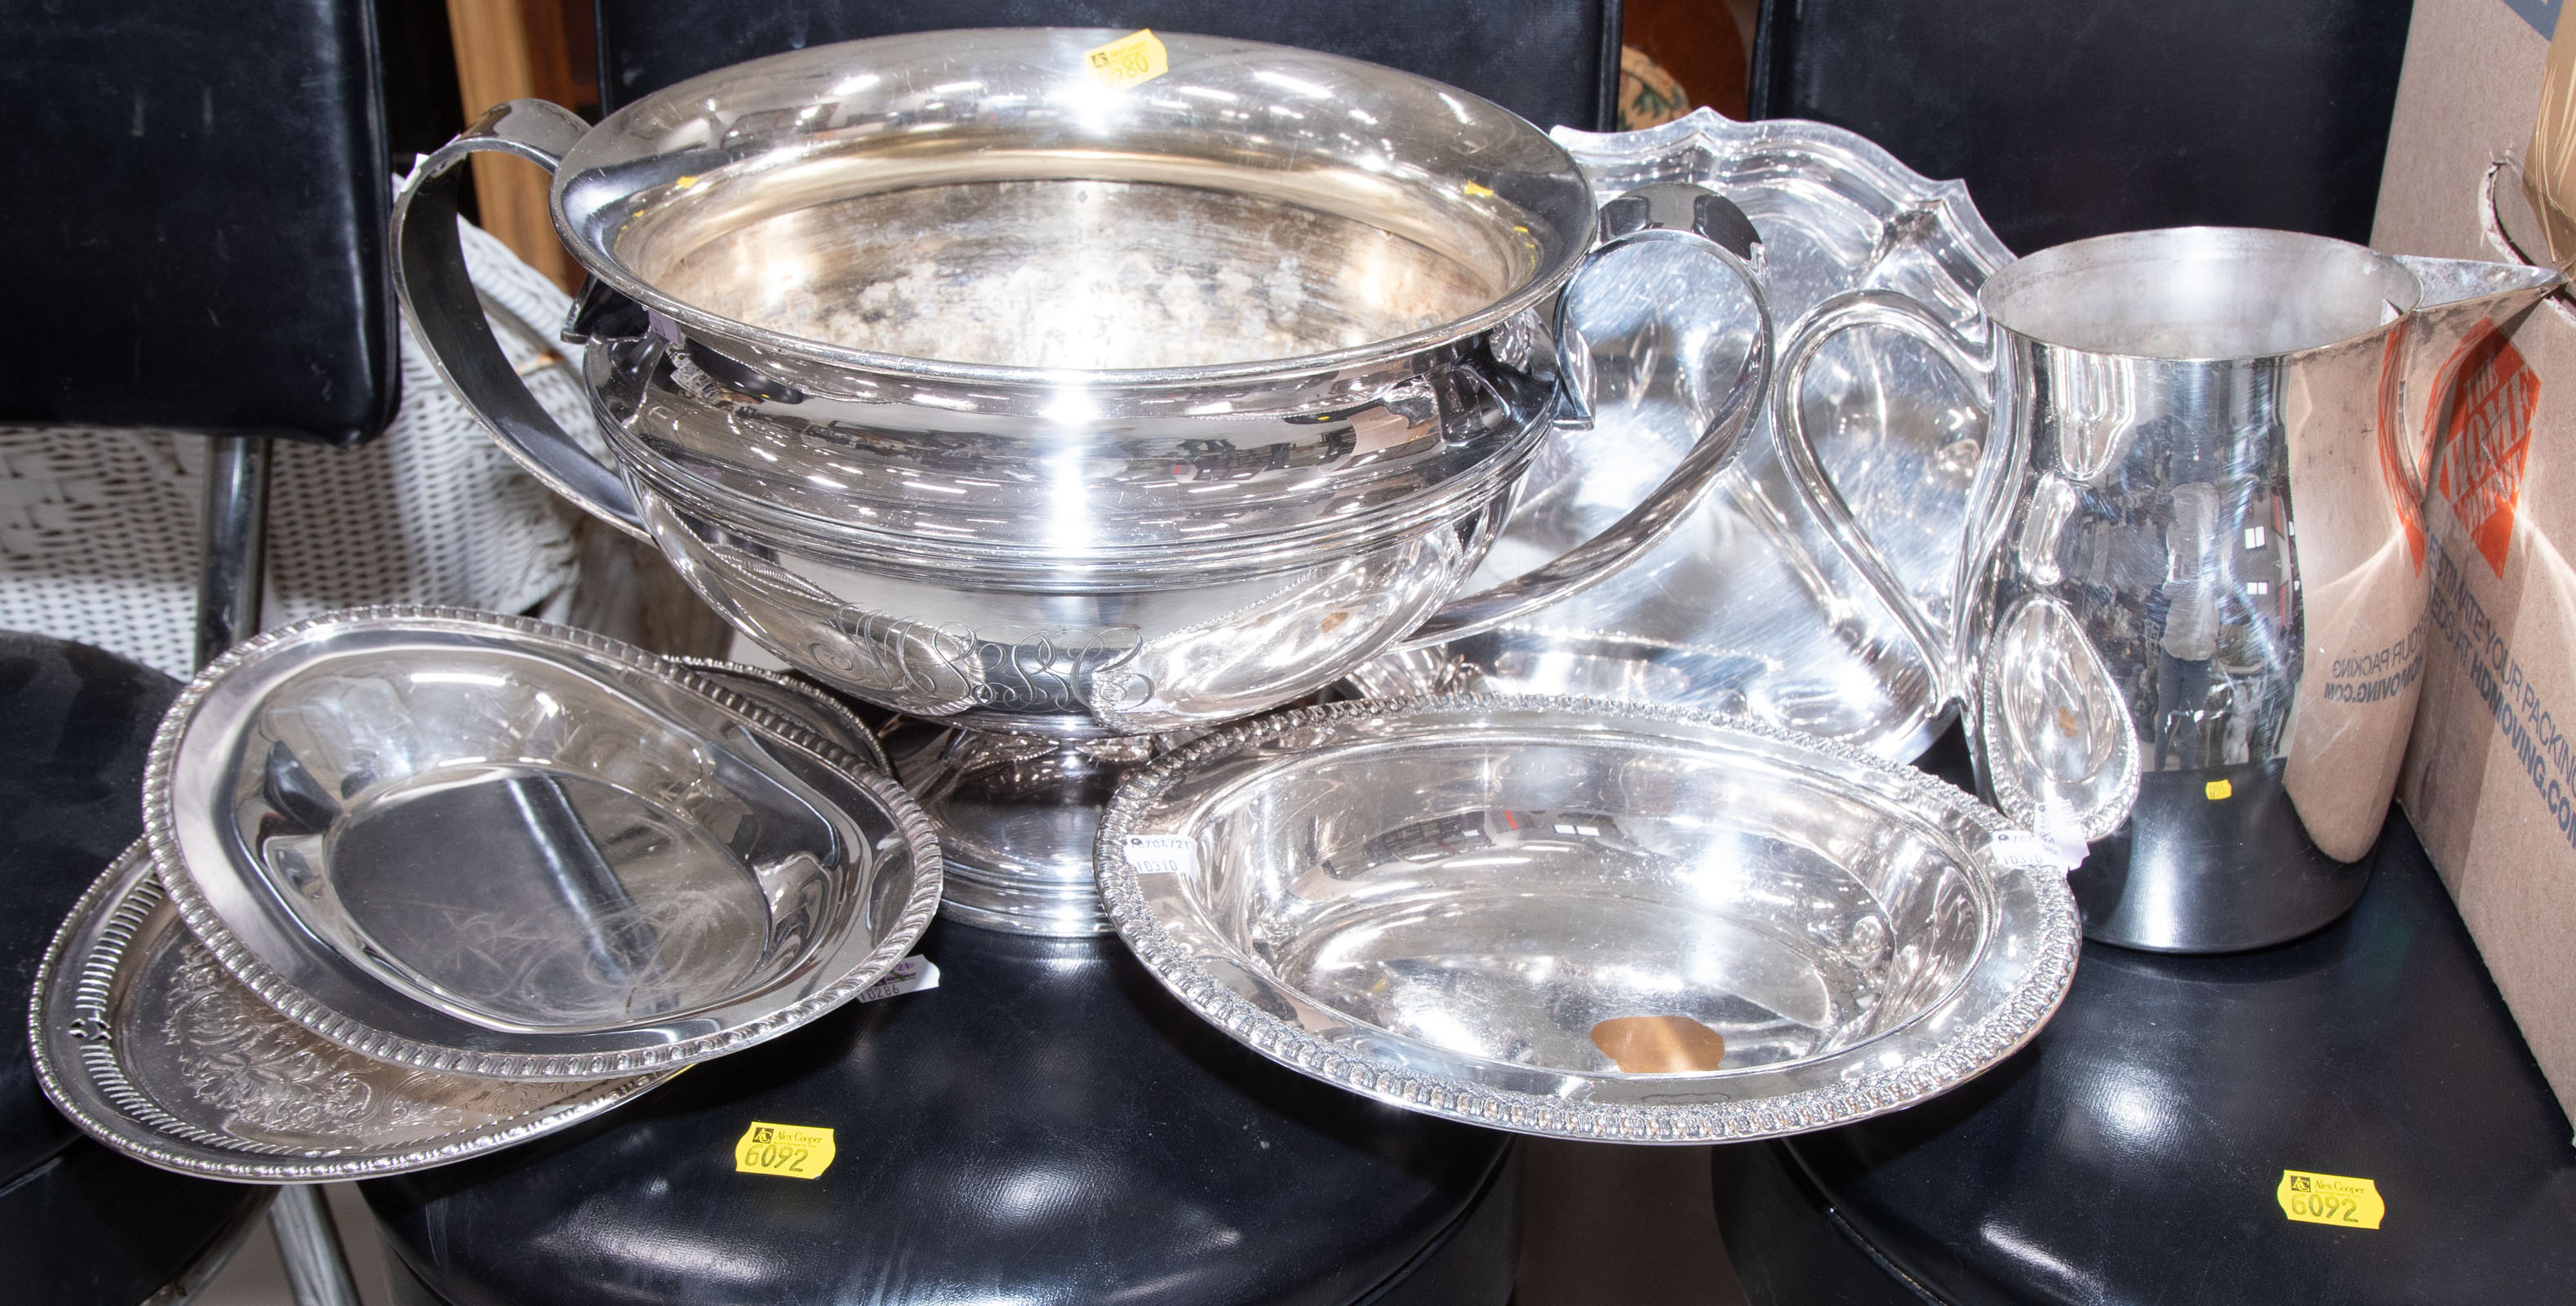 ASSORTED SILVER PLATE Includes a large